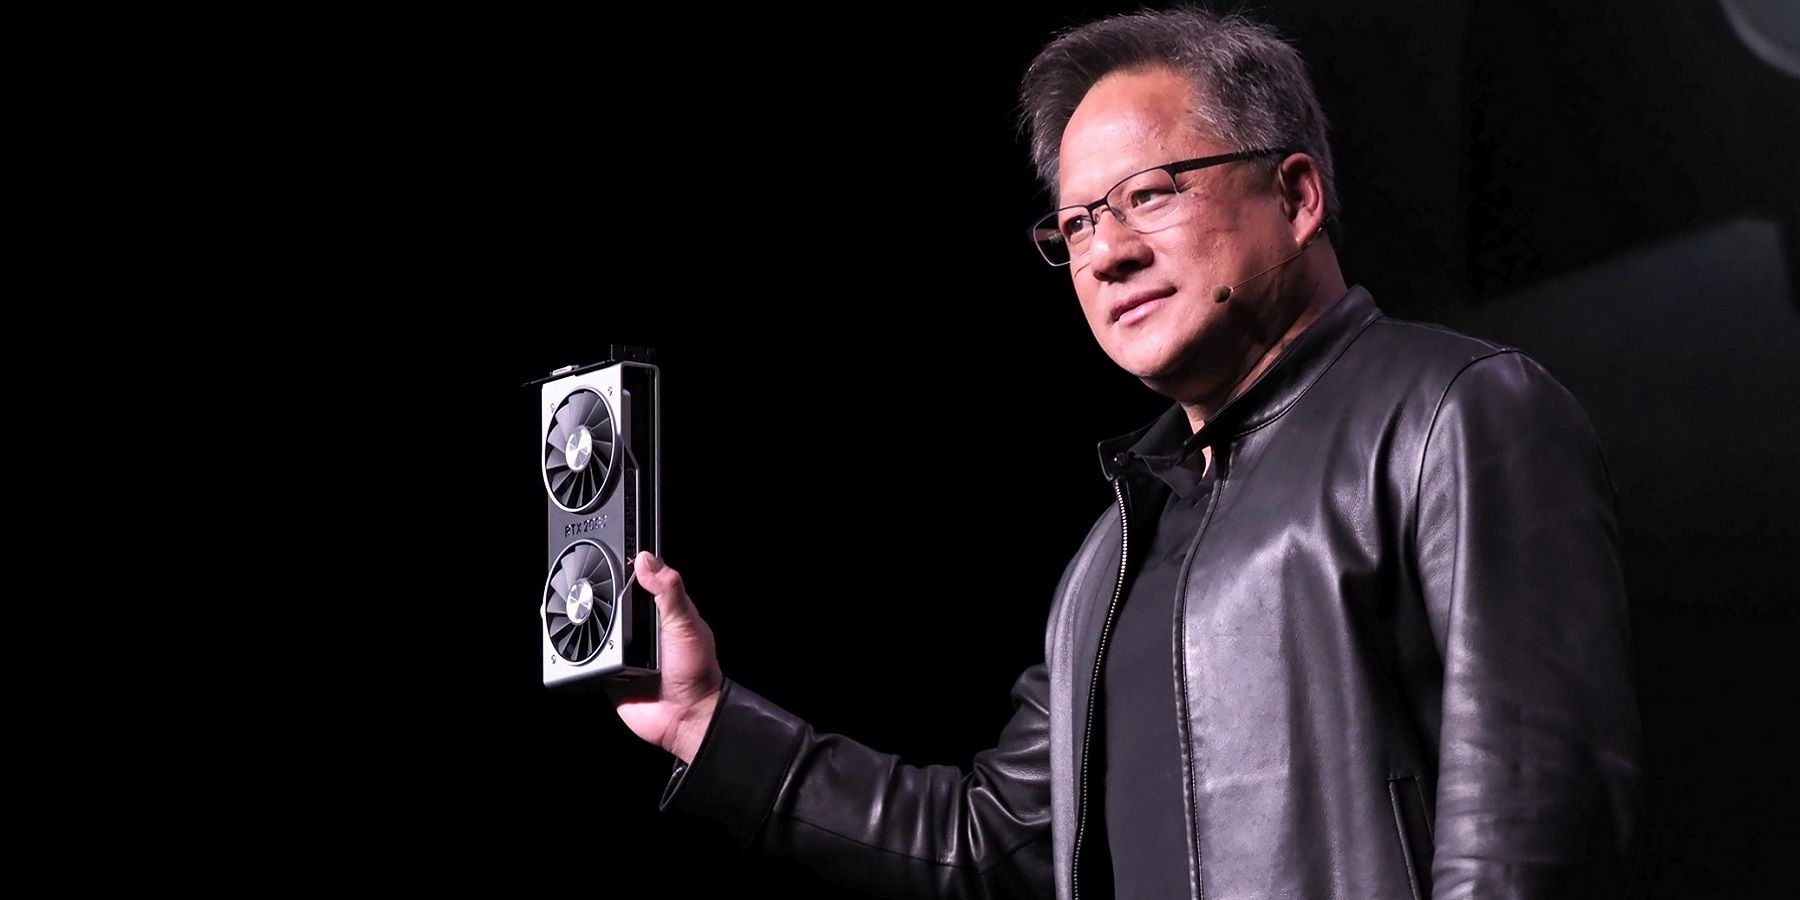 Photo of Nvidia CEO Jensen Huang holding up an RTX graphics card.